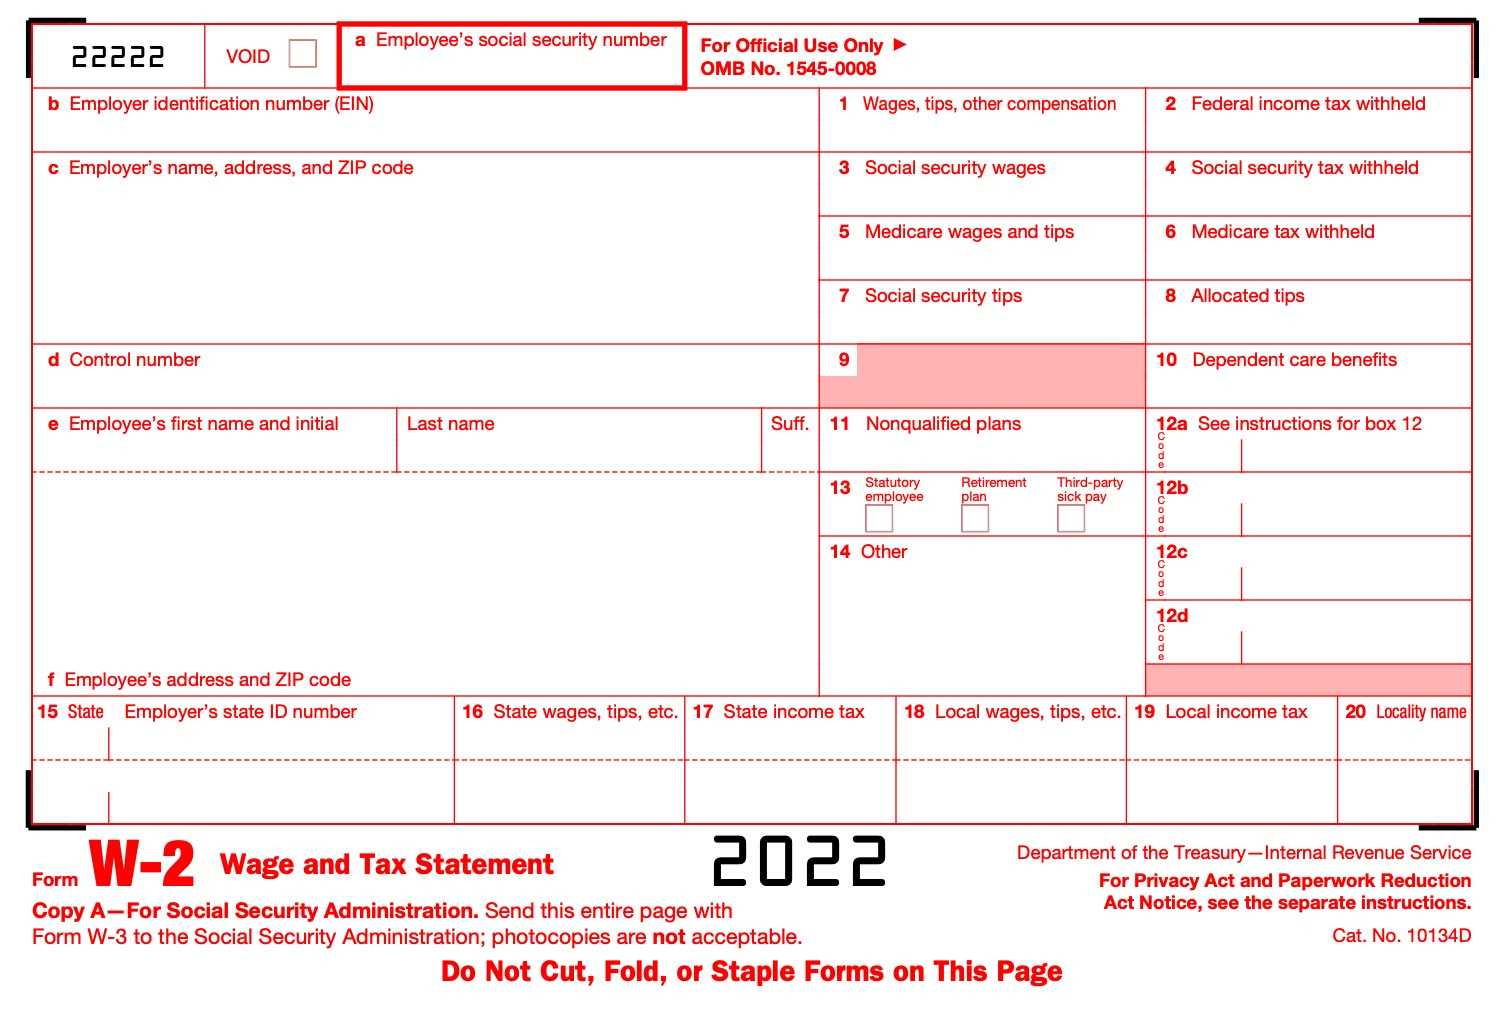 What Is Irs Form W-2? regarding When Does Ups Send W2 Forms